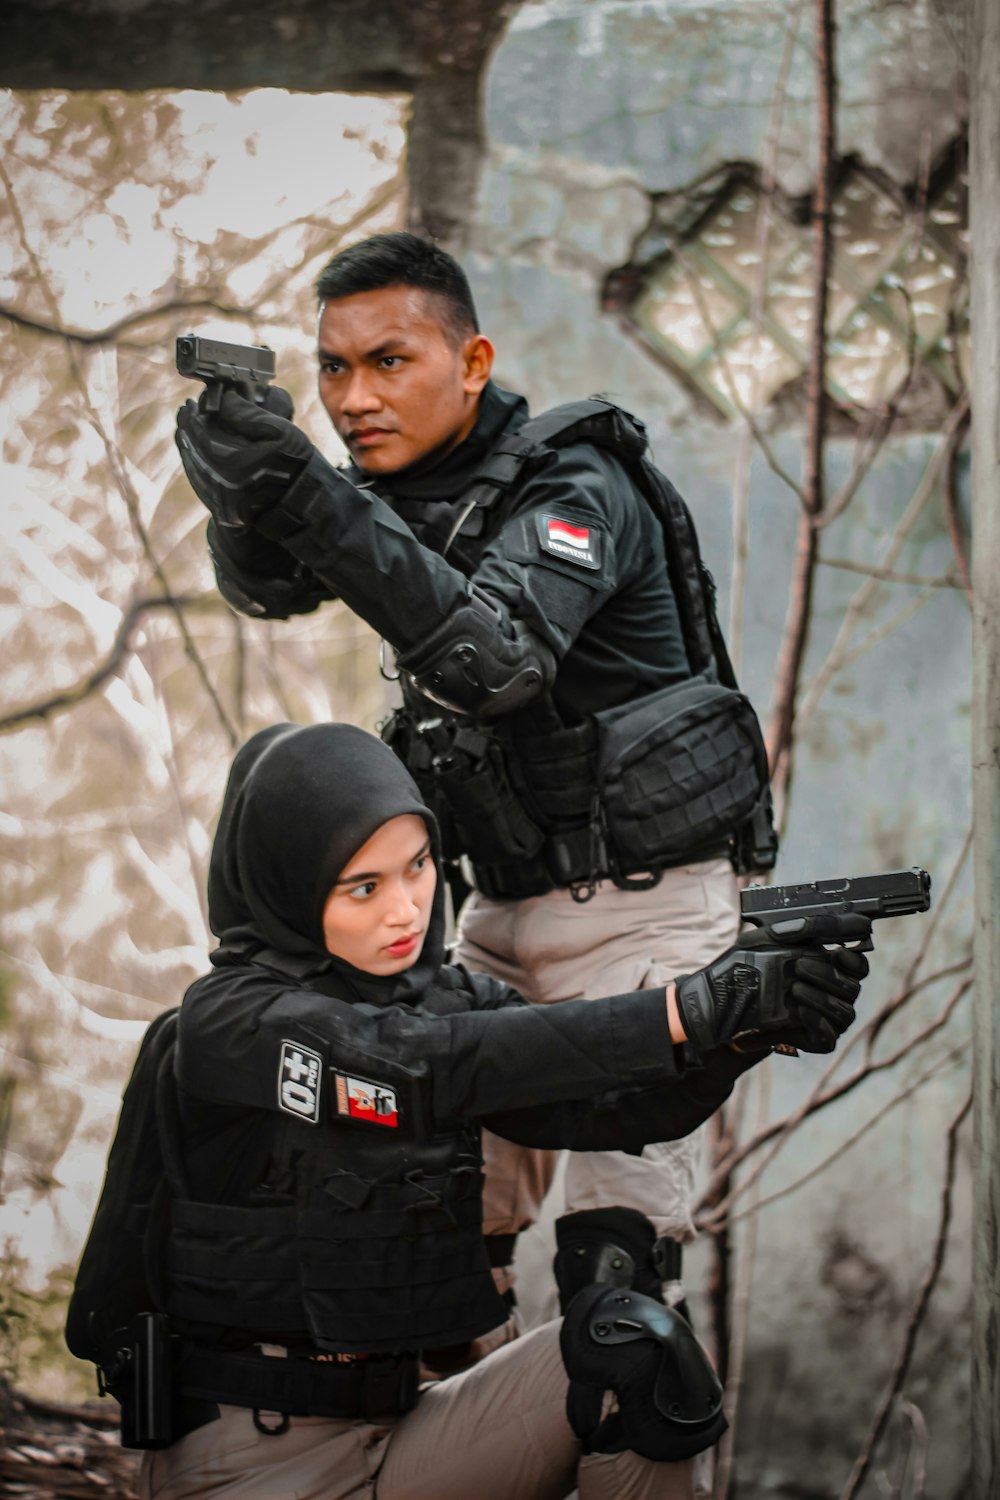 a man and woman in black uniforms